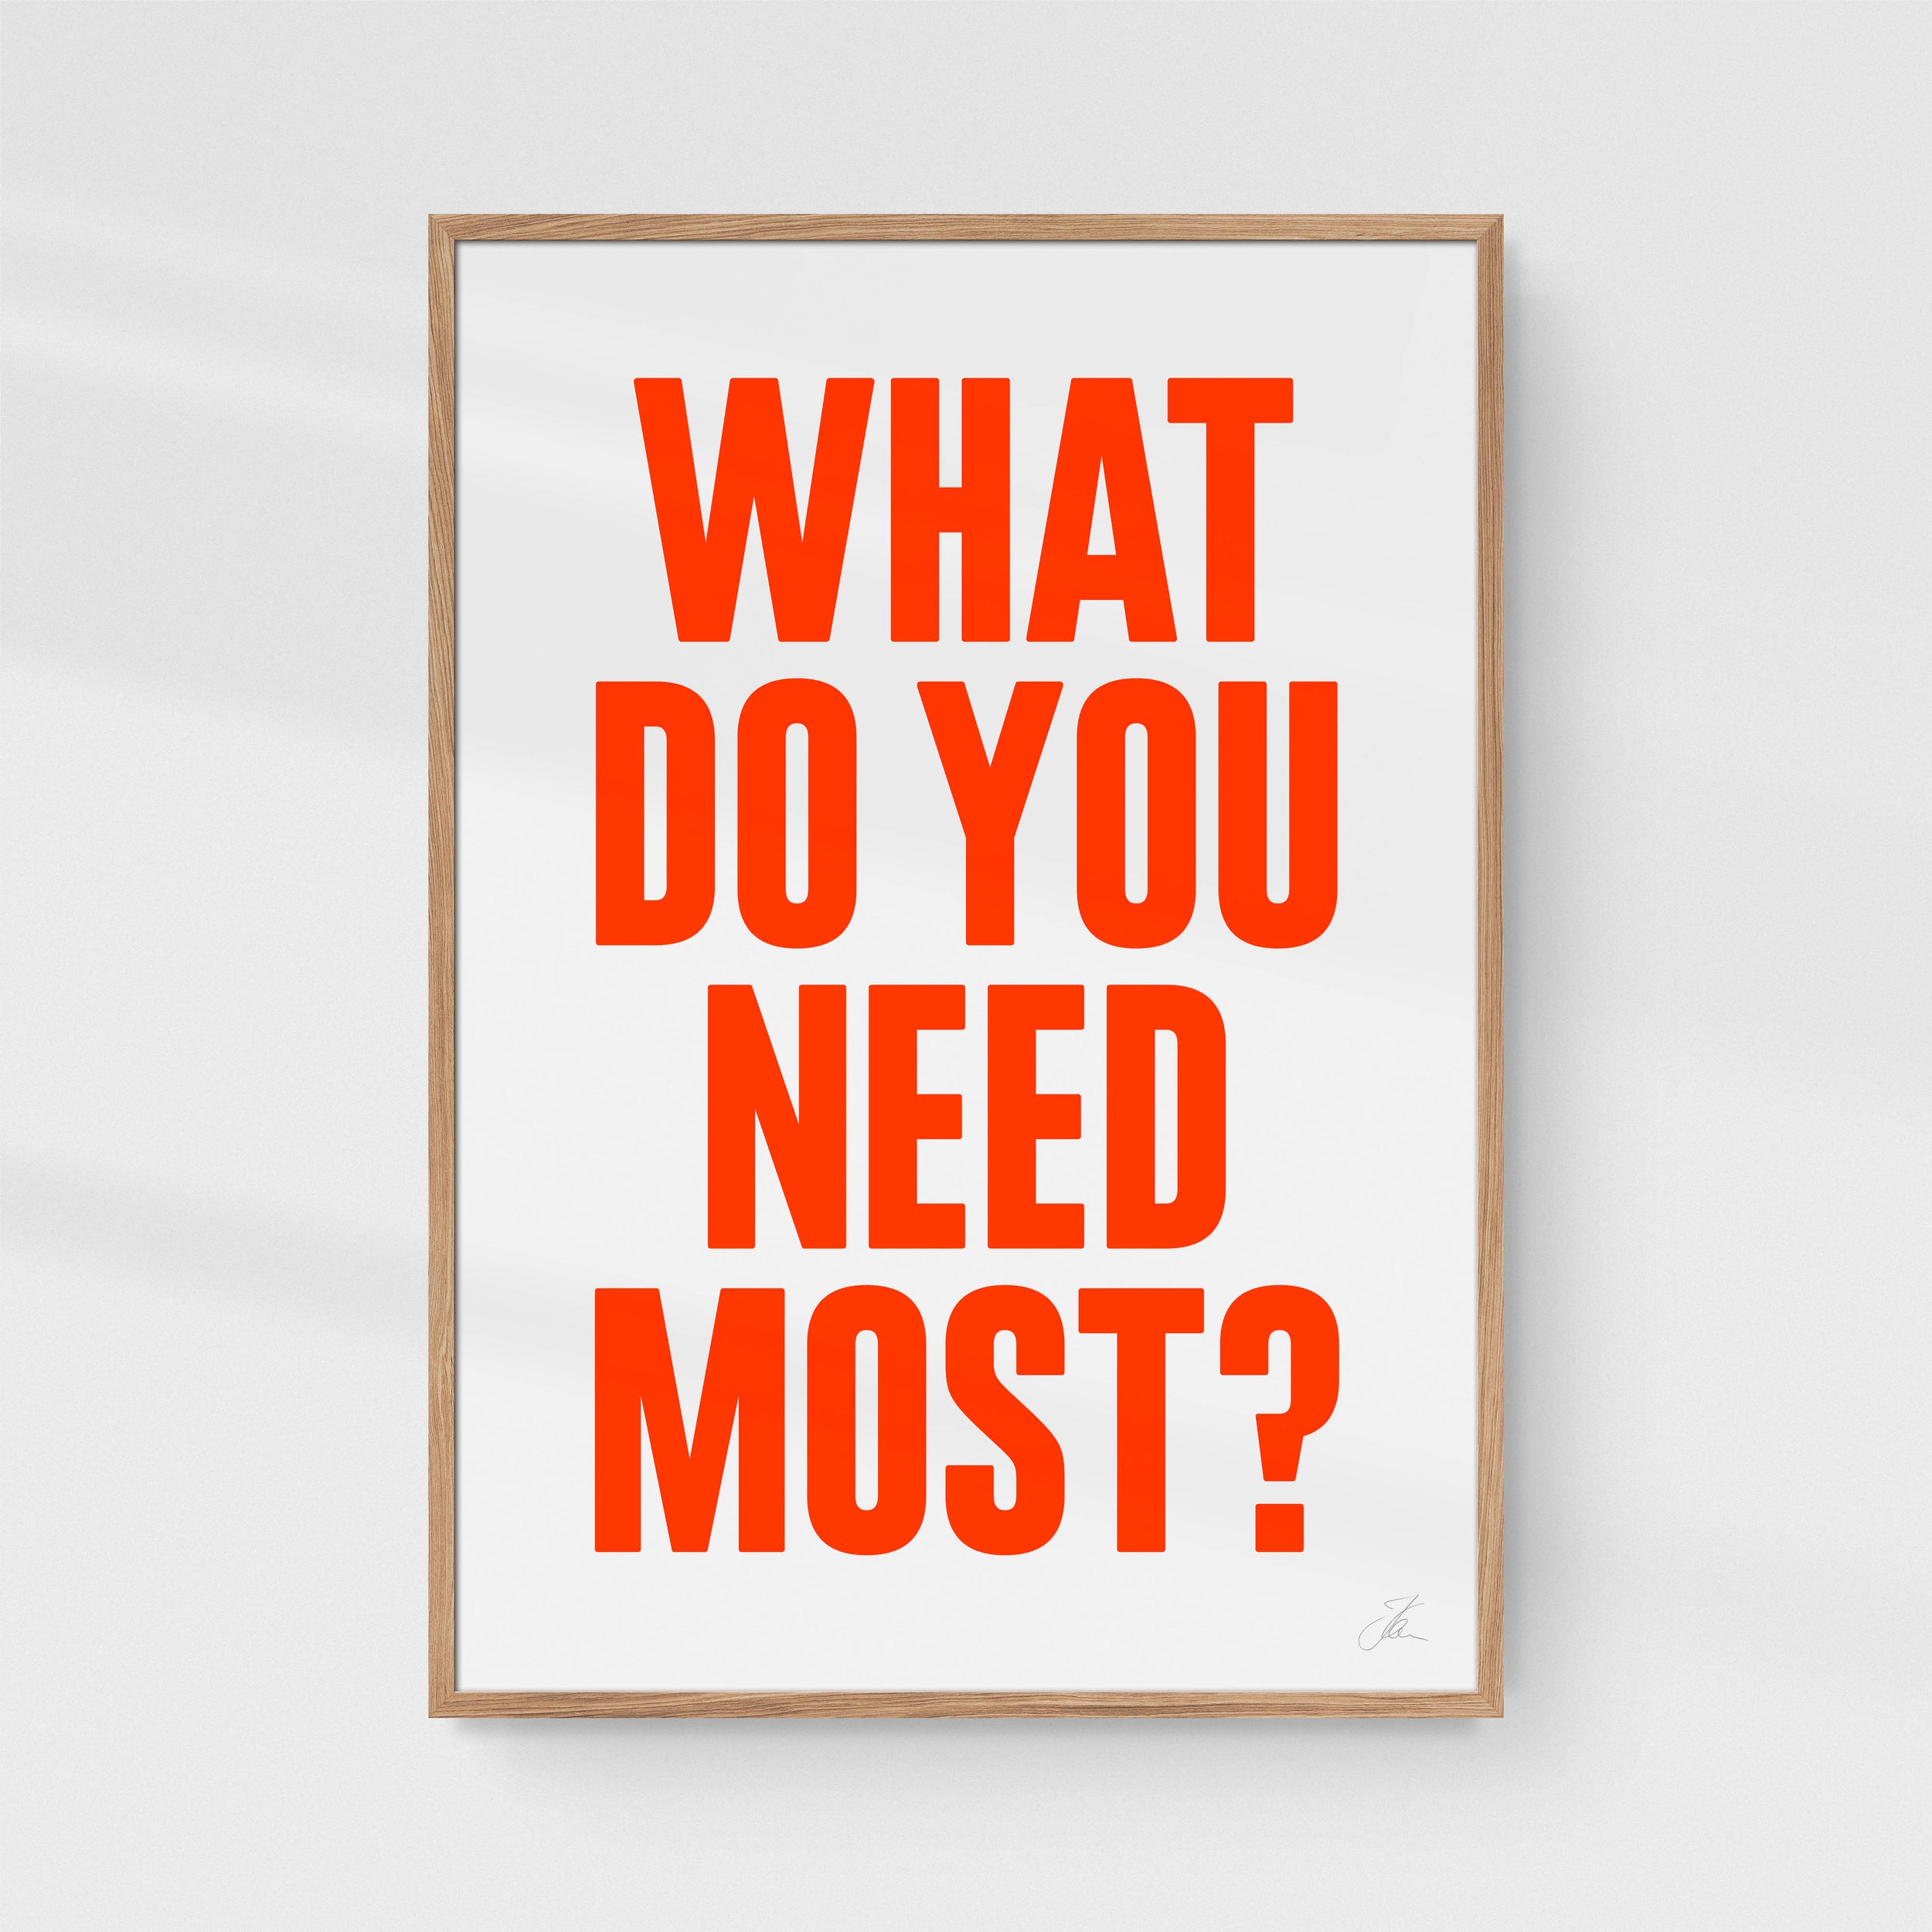 What do you need most?